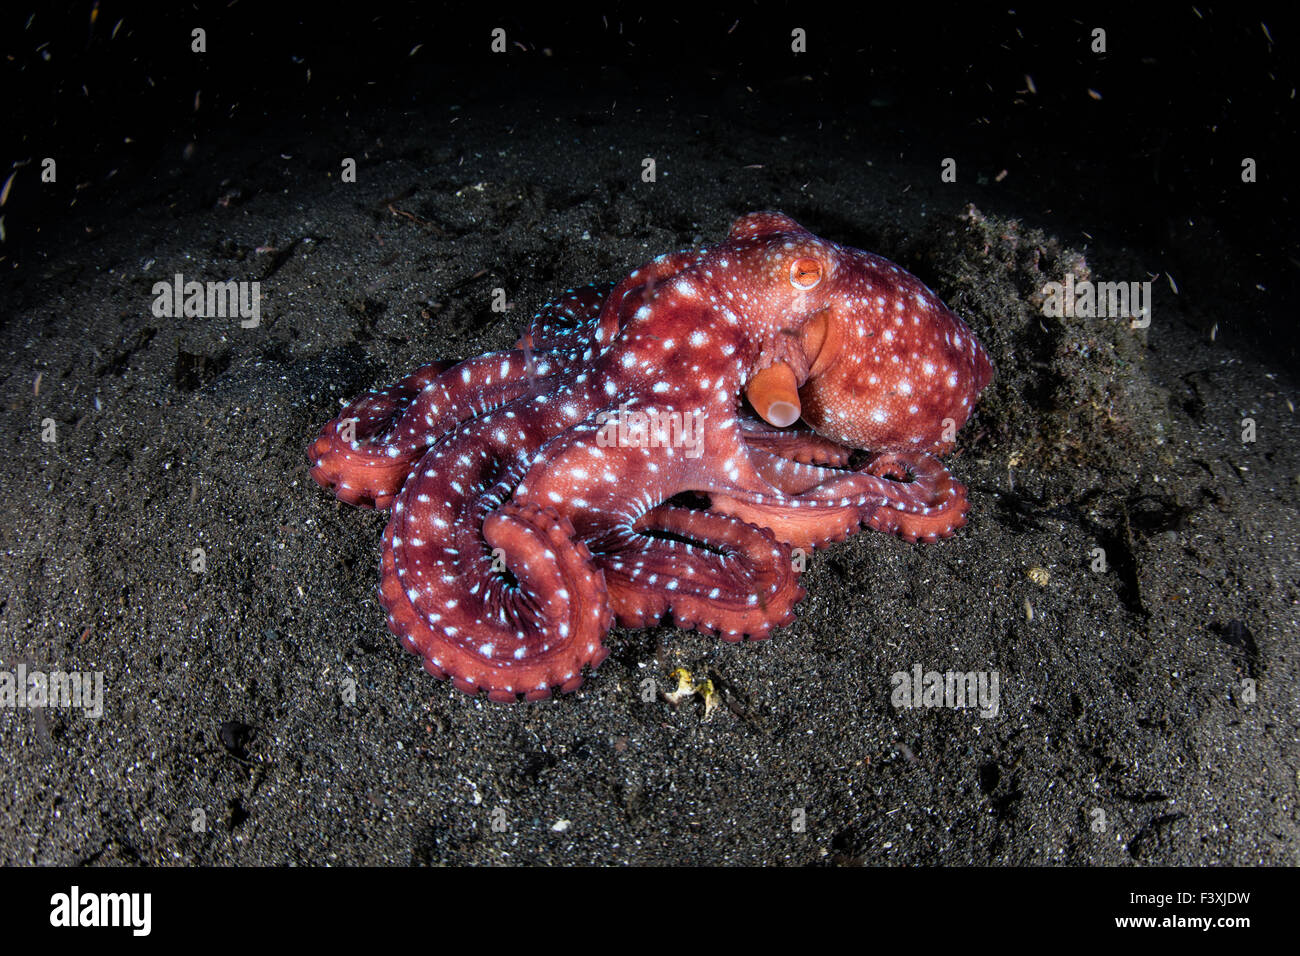 A Starry Night octopus (Octopus luteus) crawls in the dark on a volcanic sand slope in Komodo National Park, Indonesia. Stock Photo